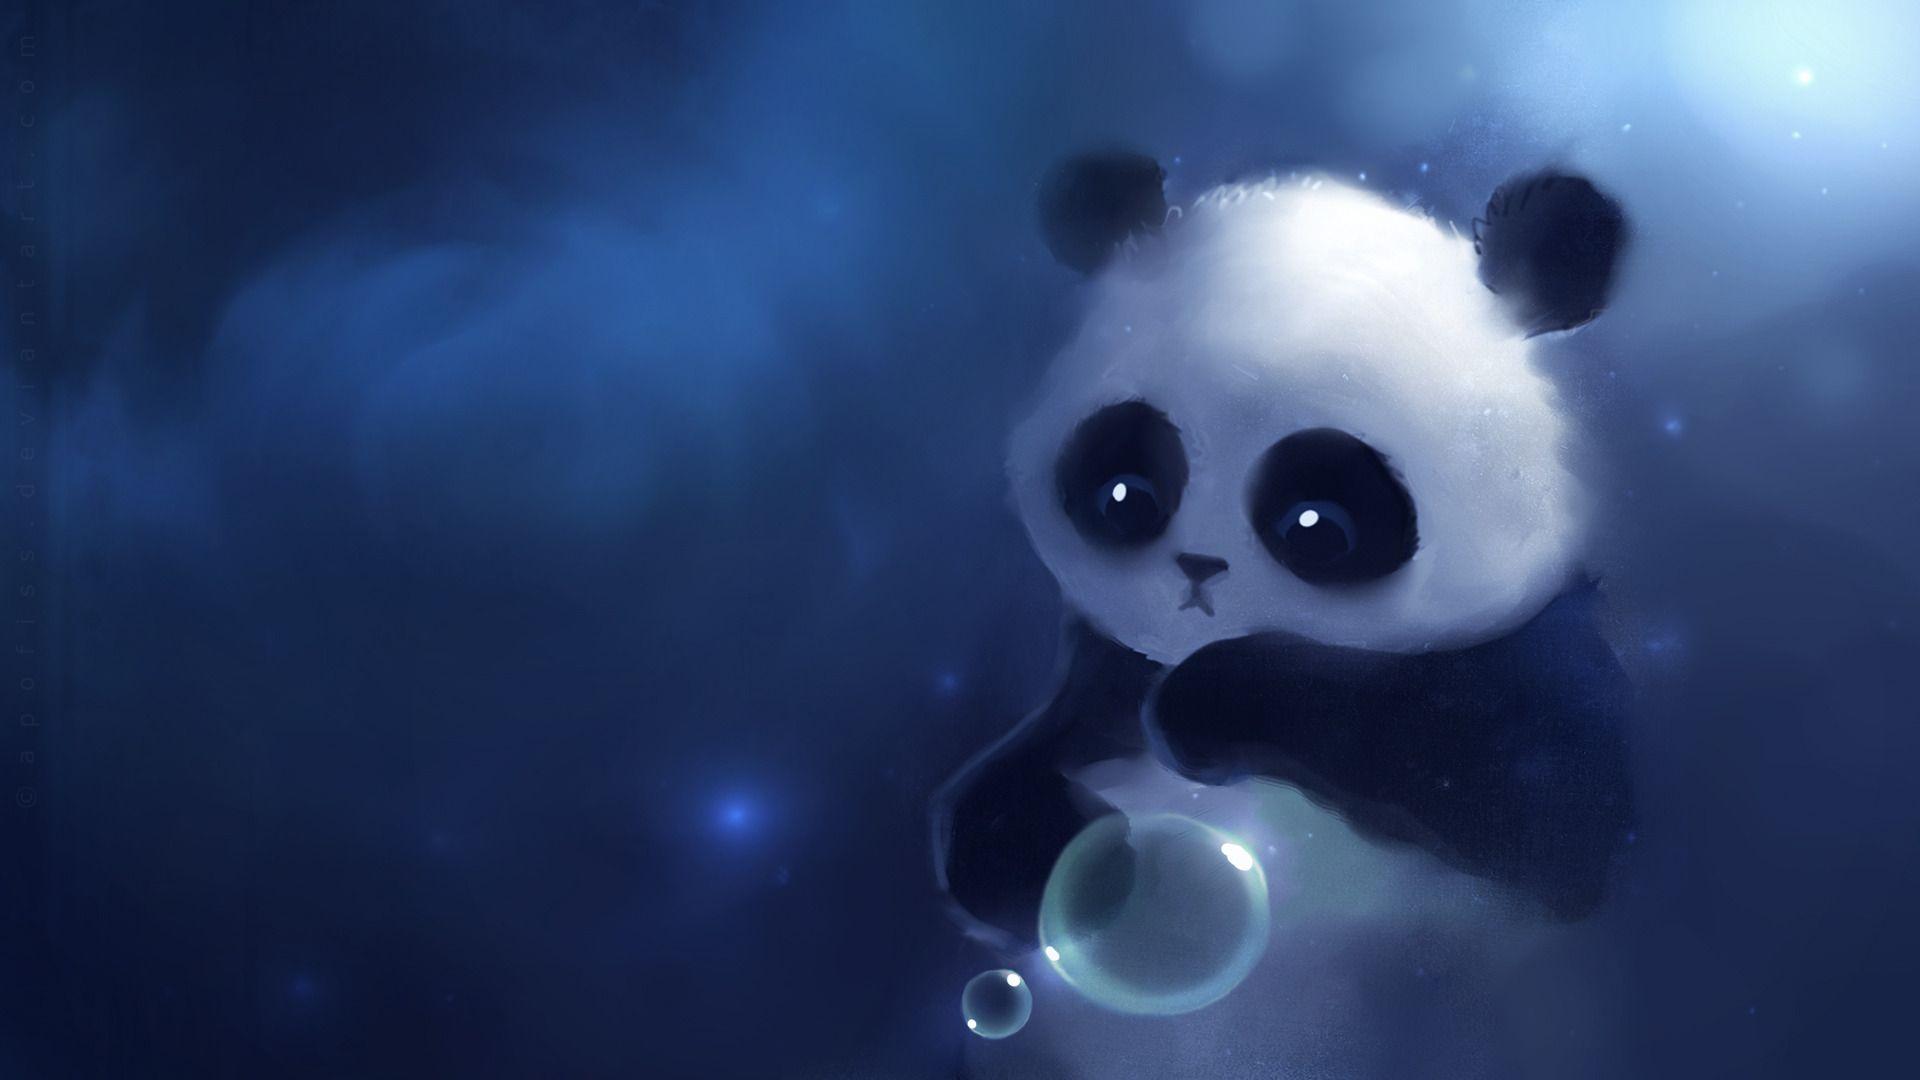 Panda 1920x1080 px. HQ Definition Pics for mobile and desktop